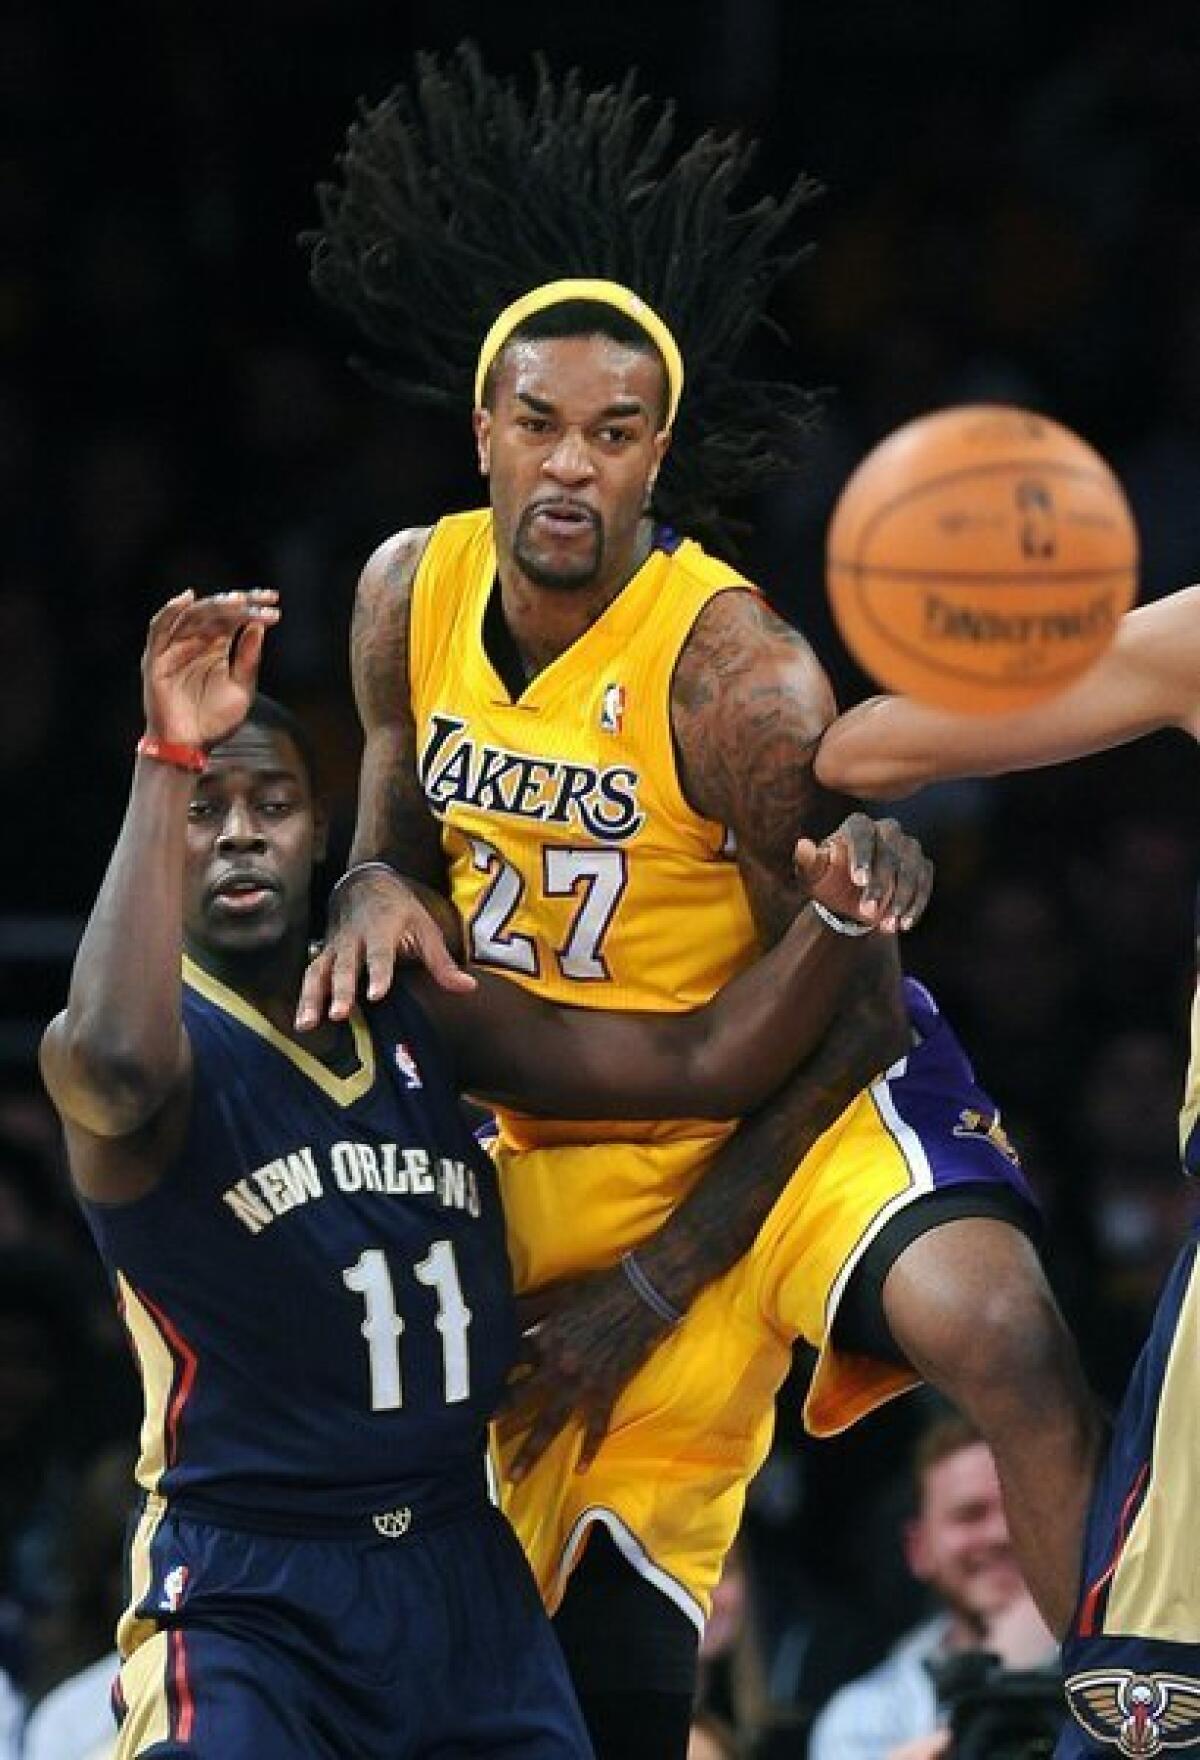 Lakers big man Jordan Hill (27) leans on New Orleans' Jrue Holiday during the Lakers' 116-95 win over the Pelicans at Staples Center on Tuesday.